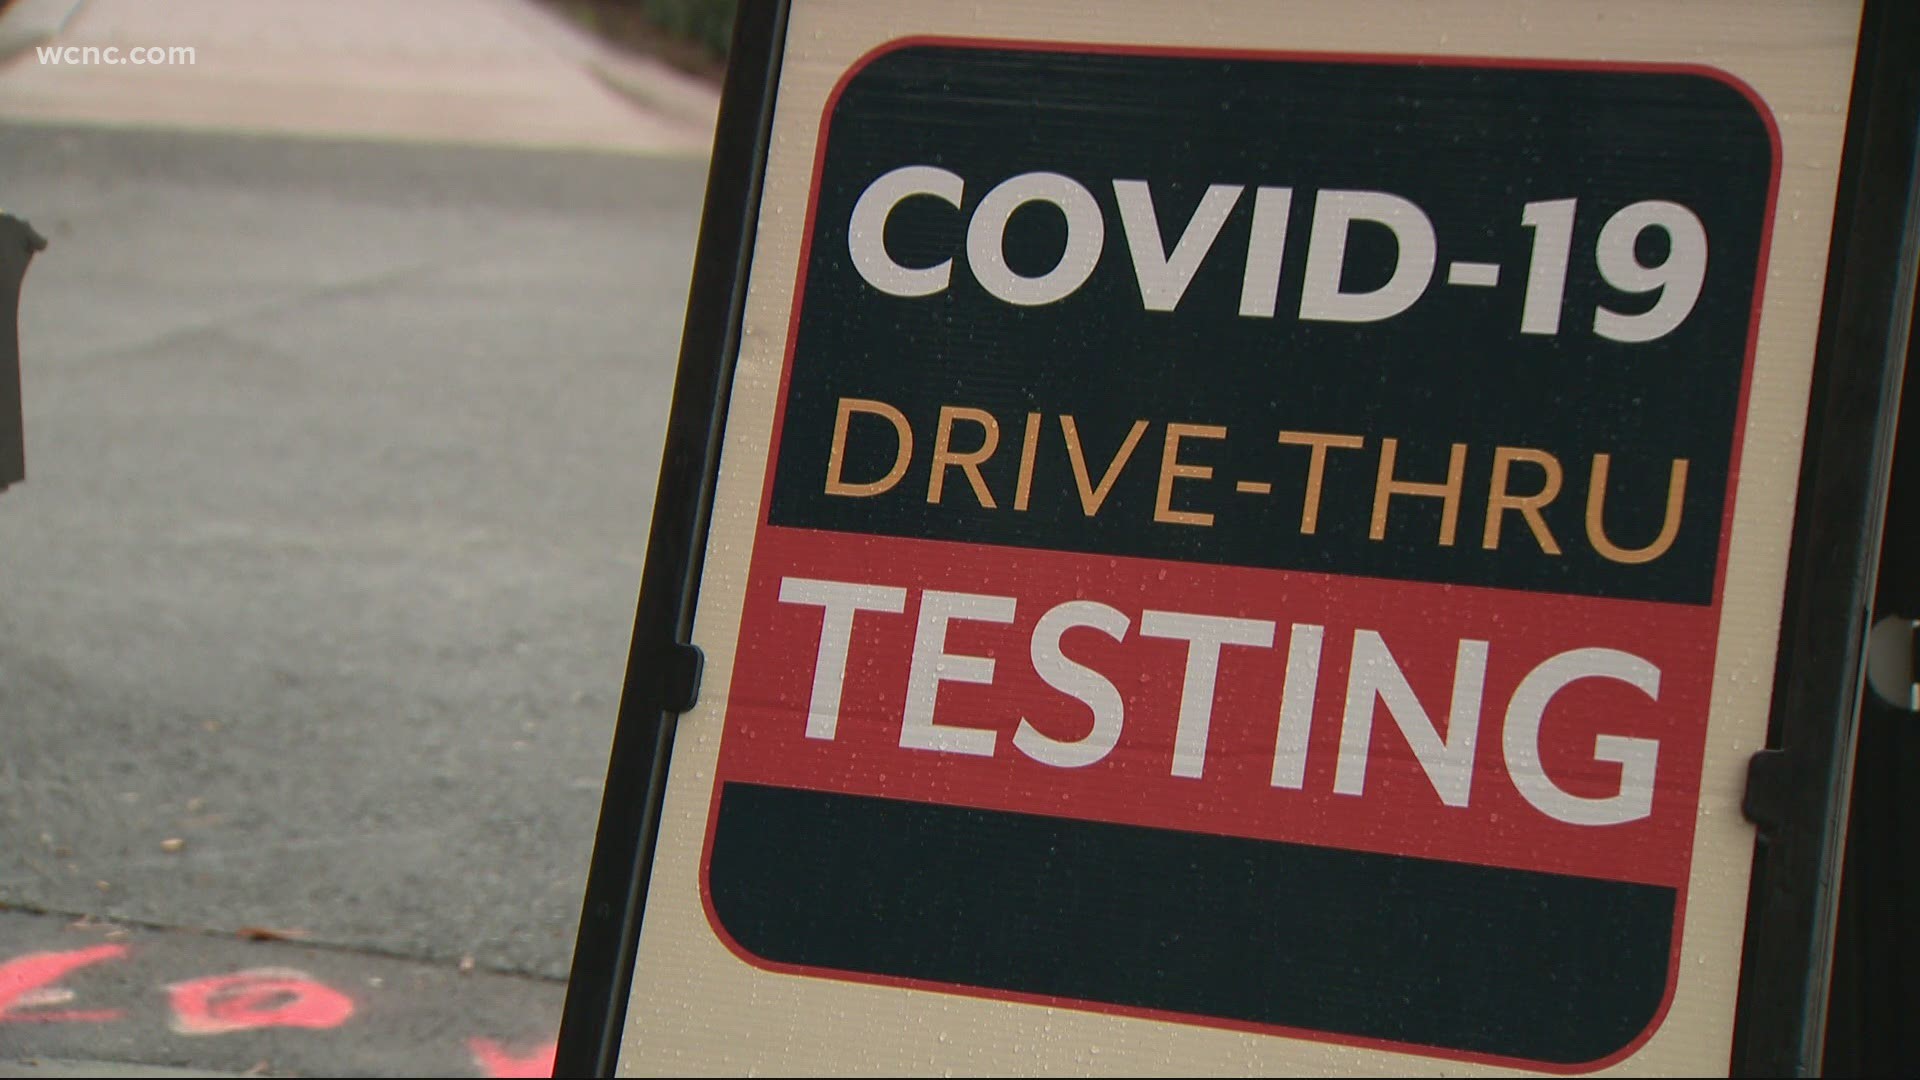 More cases could still come from the Mecktoberfest event, currently, two COVID-19 cases have been linked.